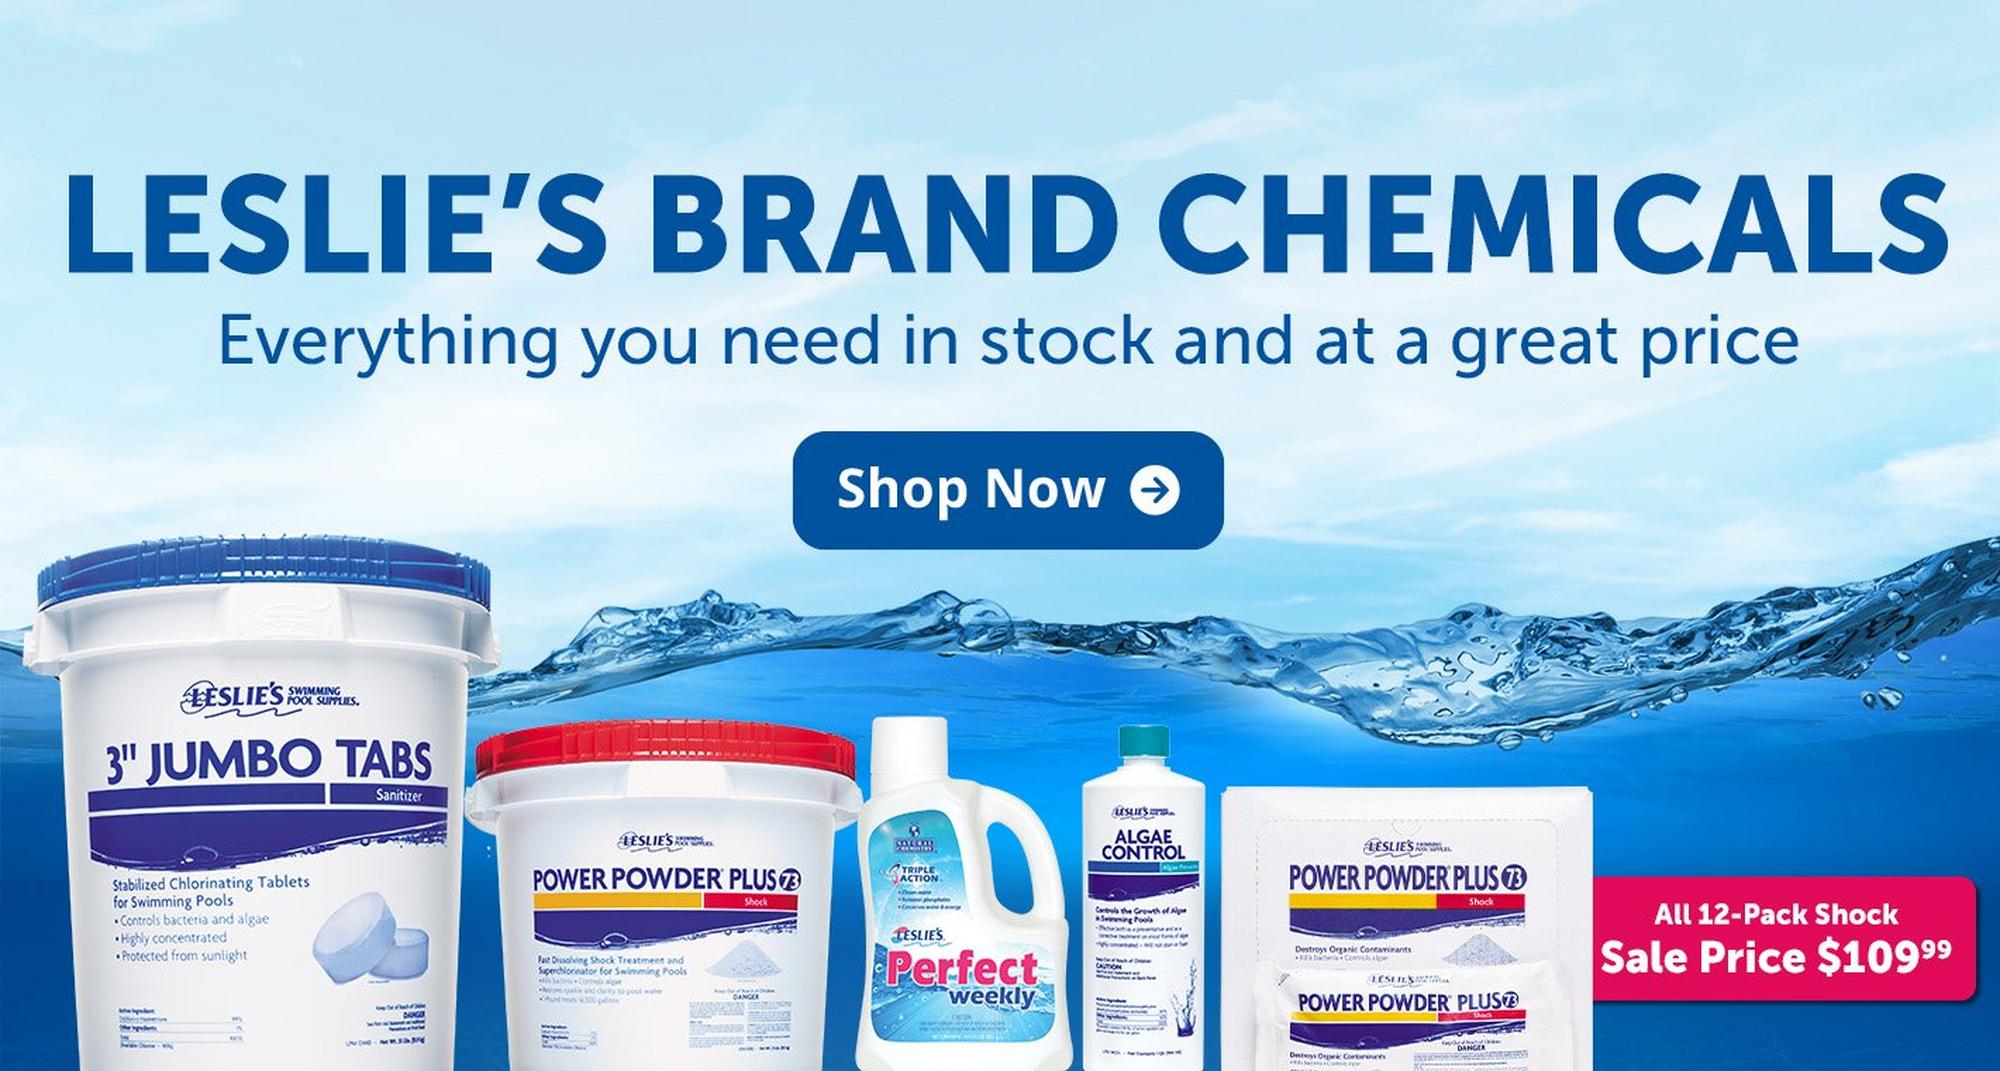 Leslies Brand Chemicals - Everything you need in stock and at a great price